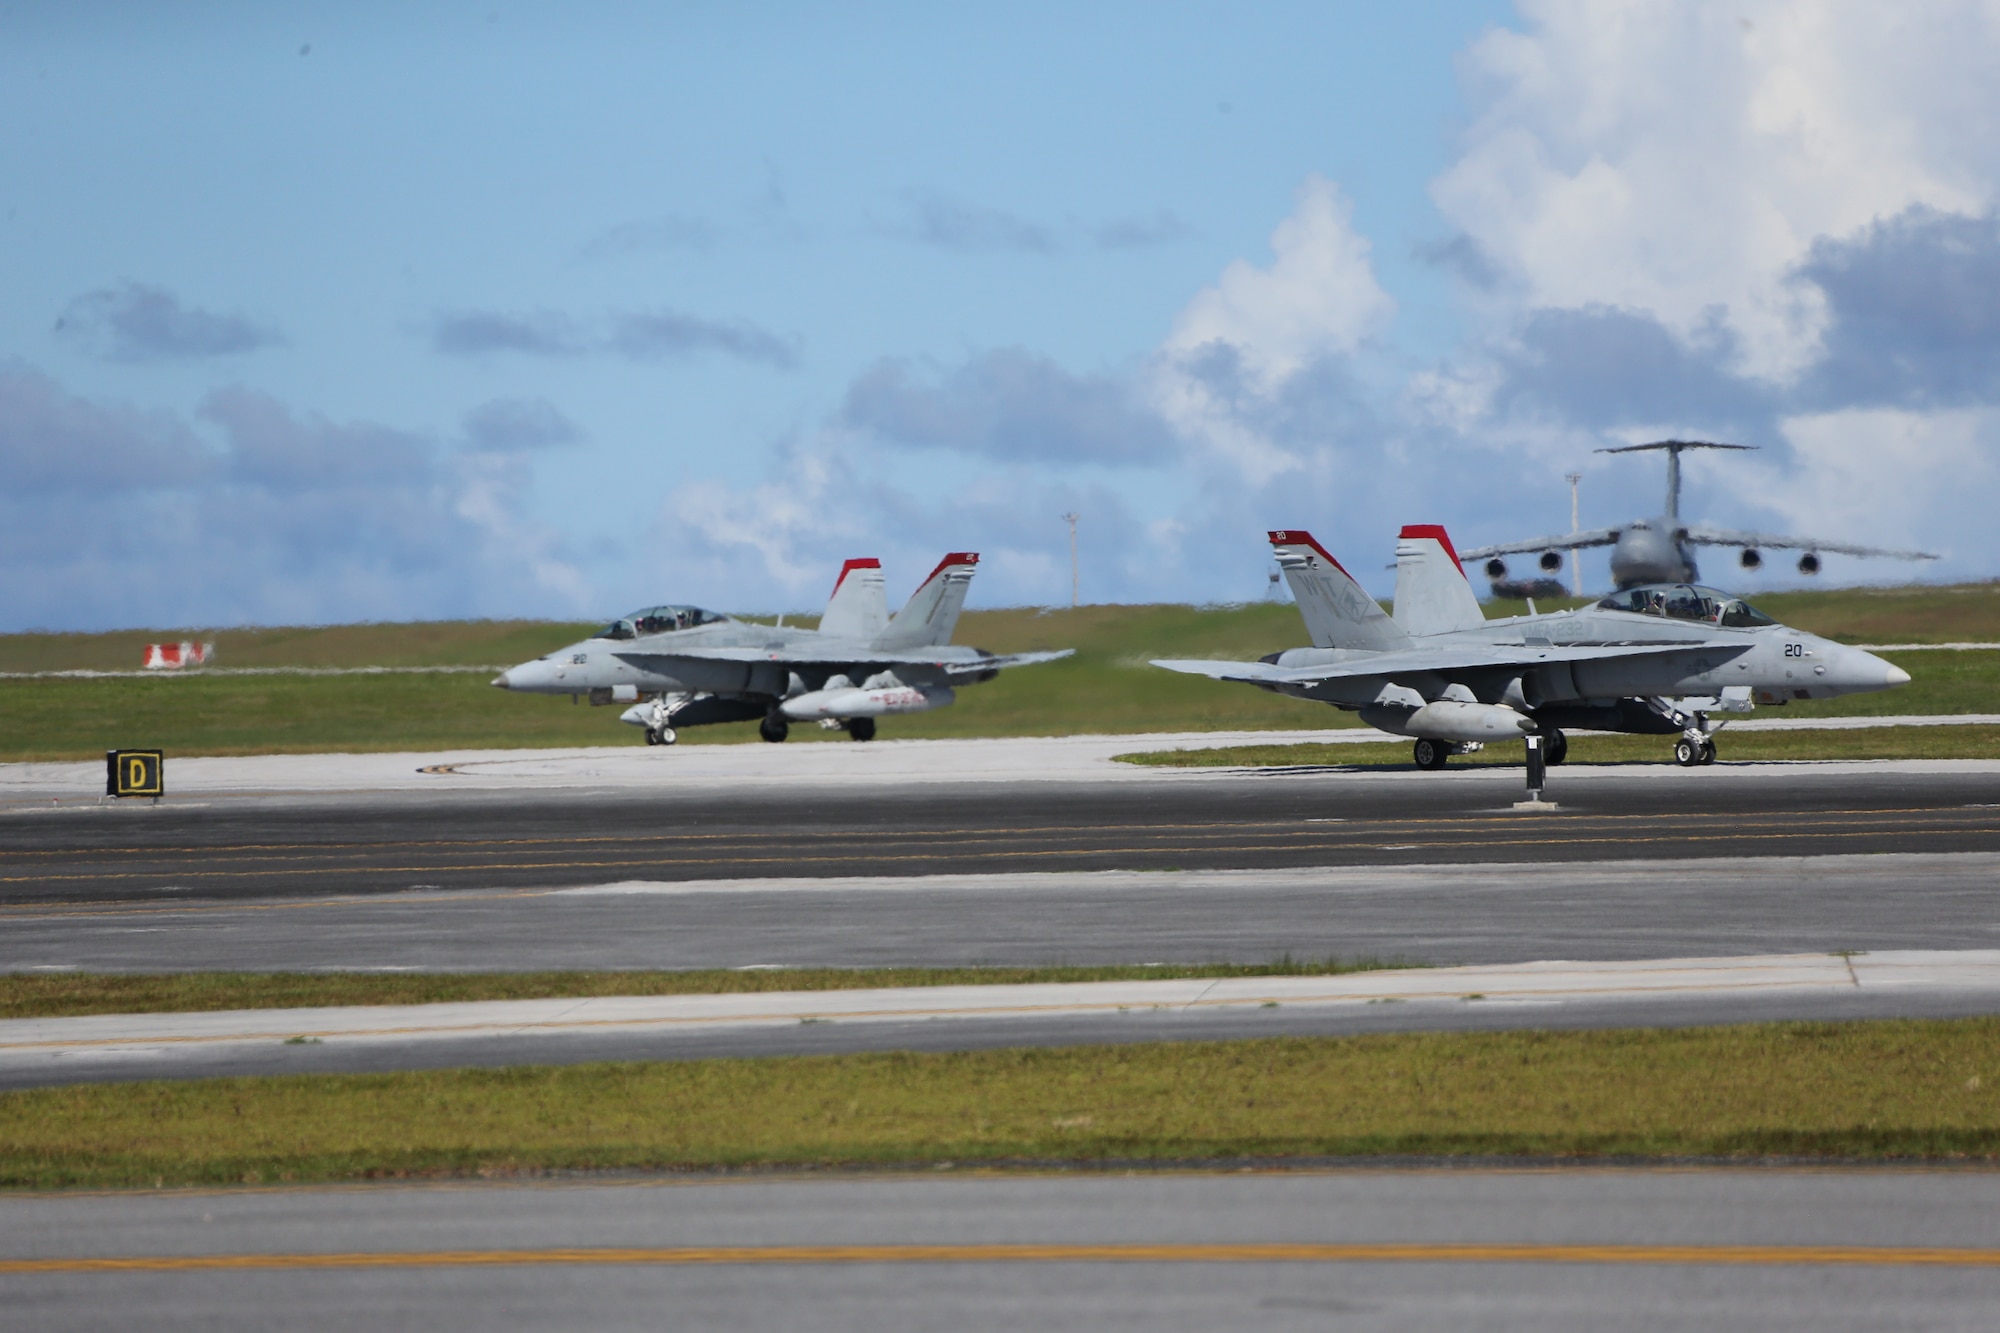 Marine Fighter Attack Squadron 232 arrives on Andersen Air Force Base, Guam to conduct training and participate in regional exercises, June 16, 2021. The training and exercises enable the squadron to increase operational readiness, improve interoperability and meet training requirements. Marine Corps Base Camp Blaz supports the squadron by providing them aviation hangars and spaces to perform maintenance and repair aircraft. MCB Camp Blaz continues to support units in the region by providing critical administrative and logistical support enabling them conduct training and maintain readiness. (U.S. Marine Corps Photo by Gunnery Sgt. John Ewald)